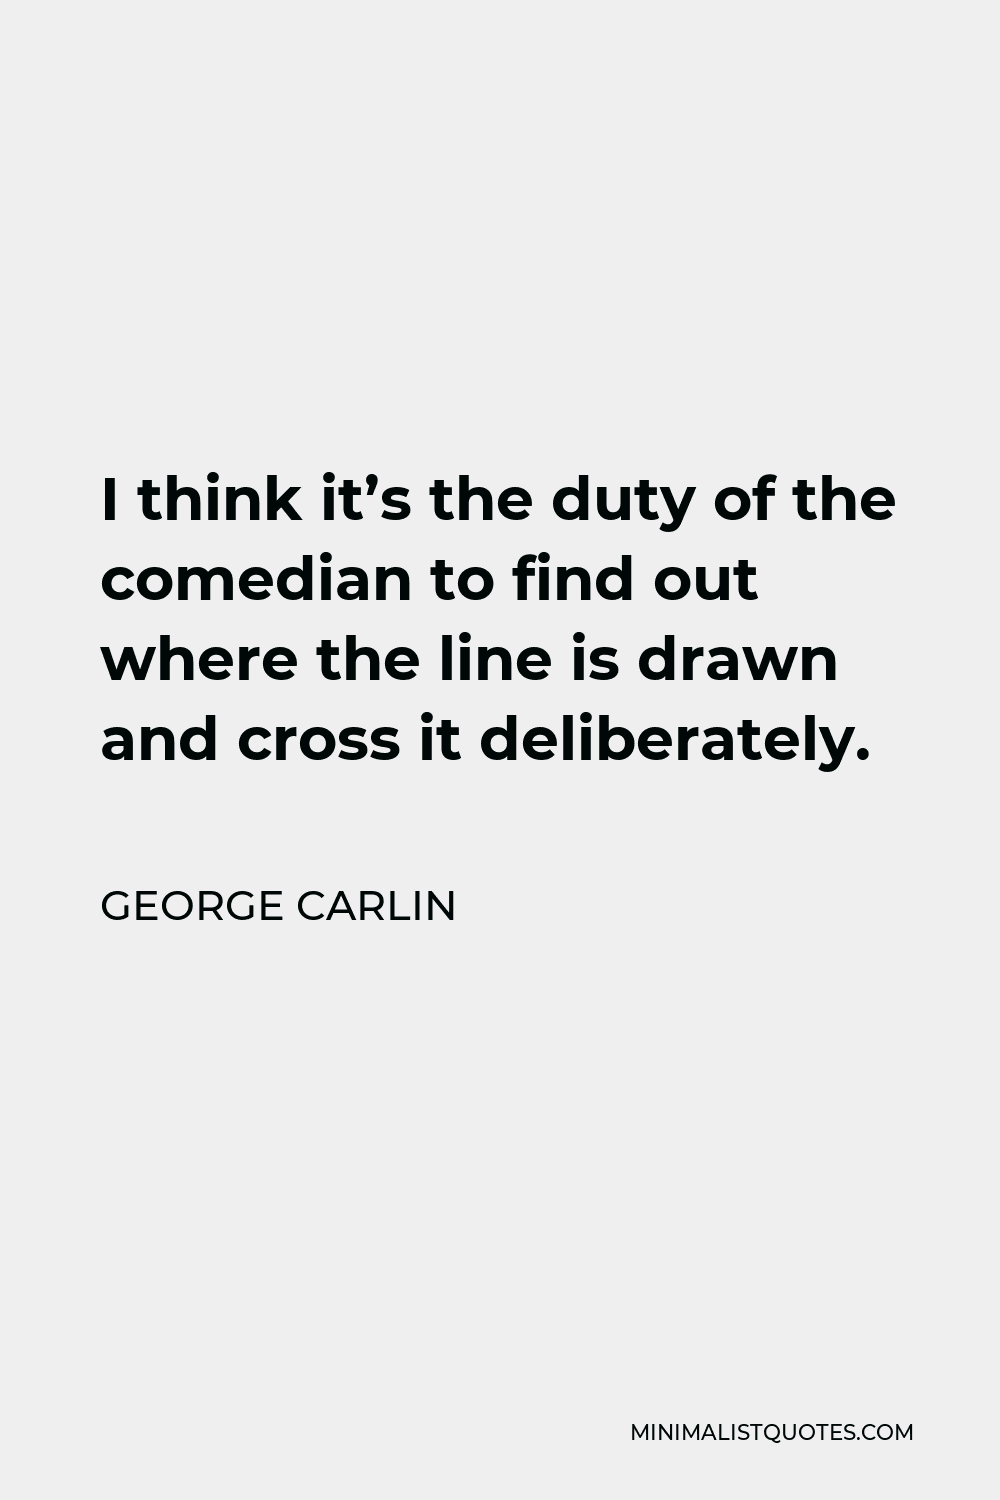 George Carlin Quote - I think it’s the duty of the comedian to find out where the line is drawn and cross it deliberately.